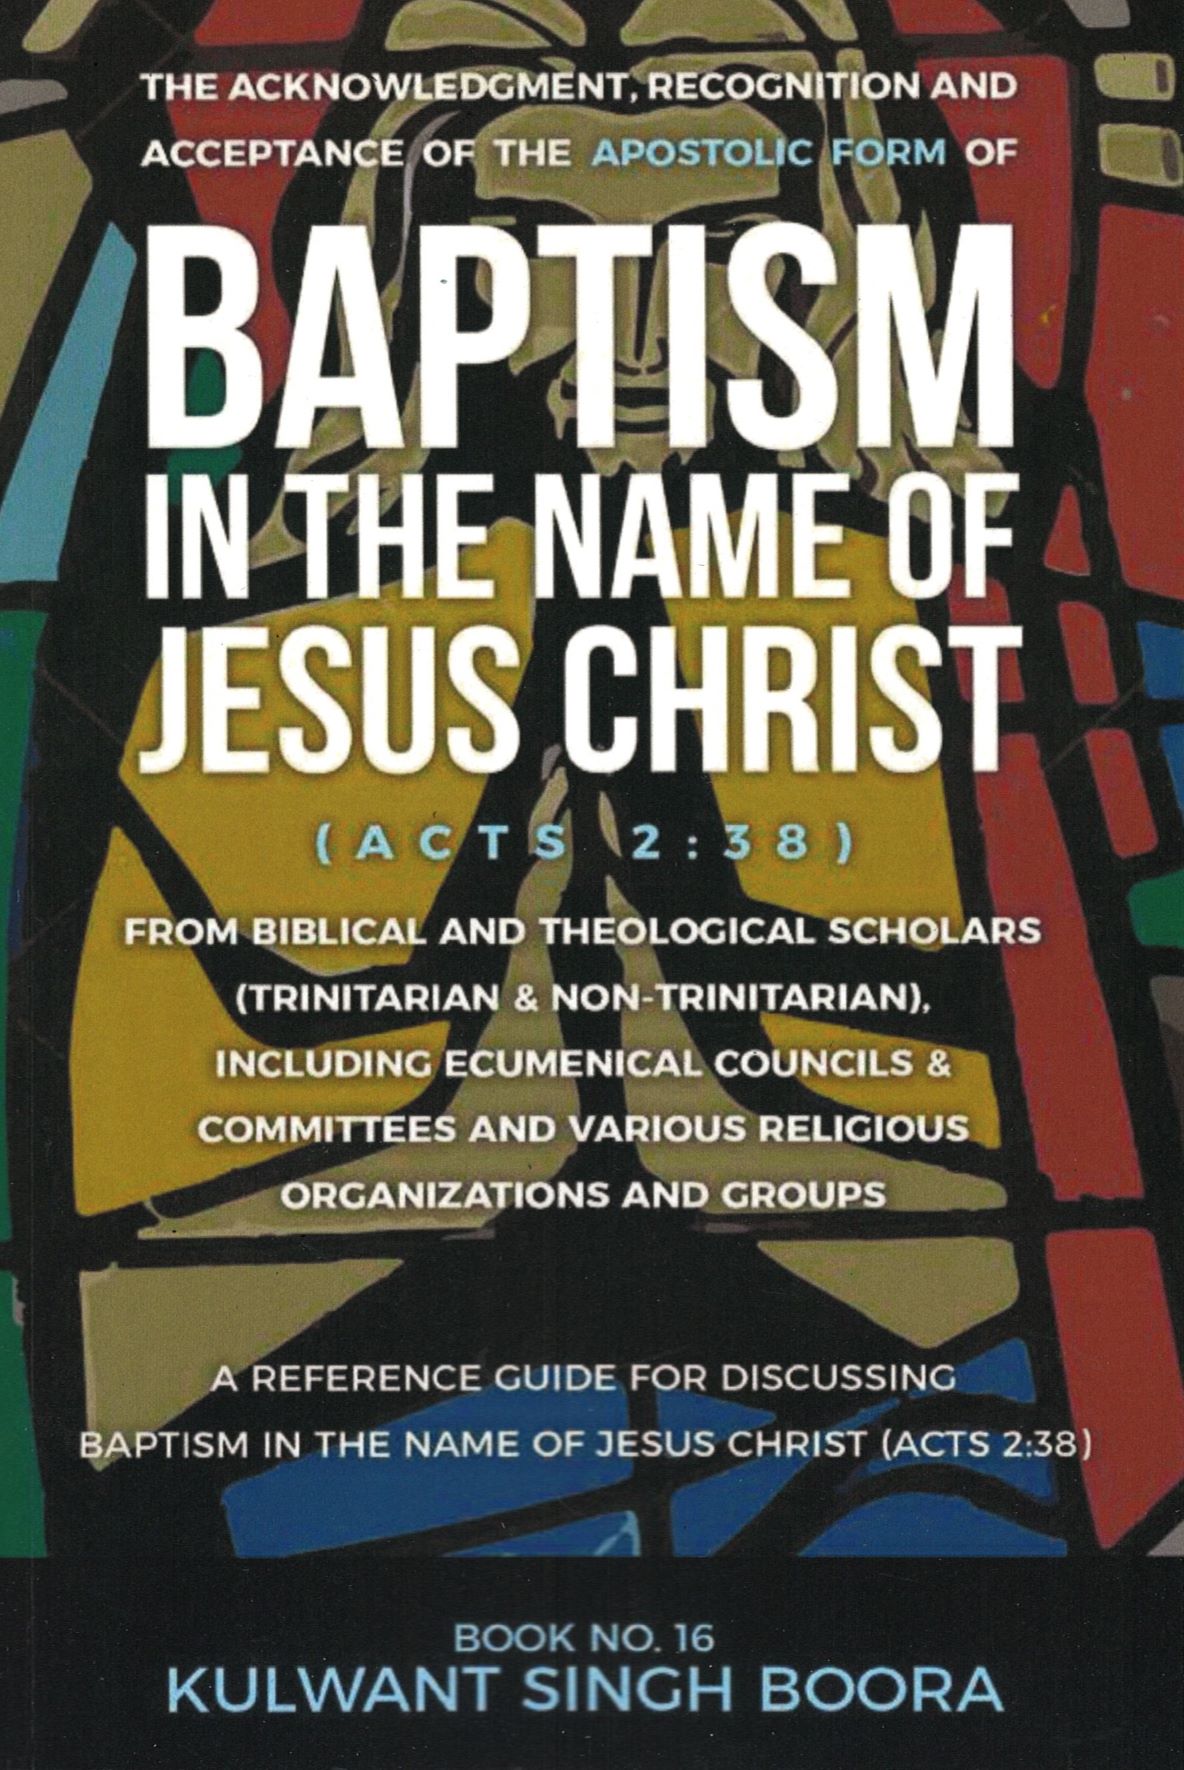 Baptism in the Name of Jesus Christ - Book 16 - Kulwant Singh Boora